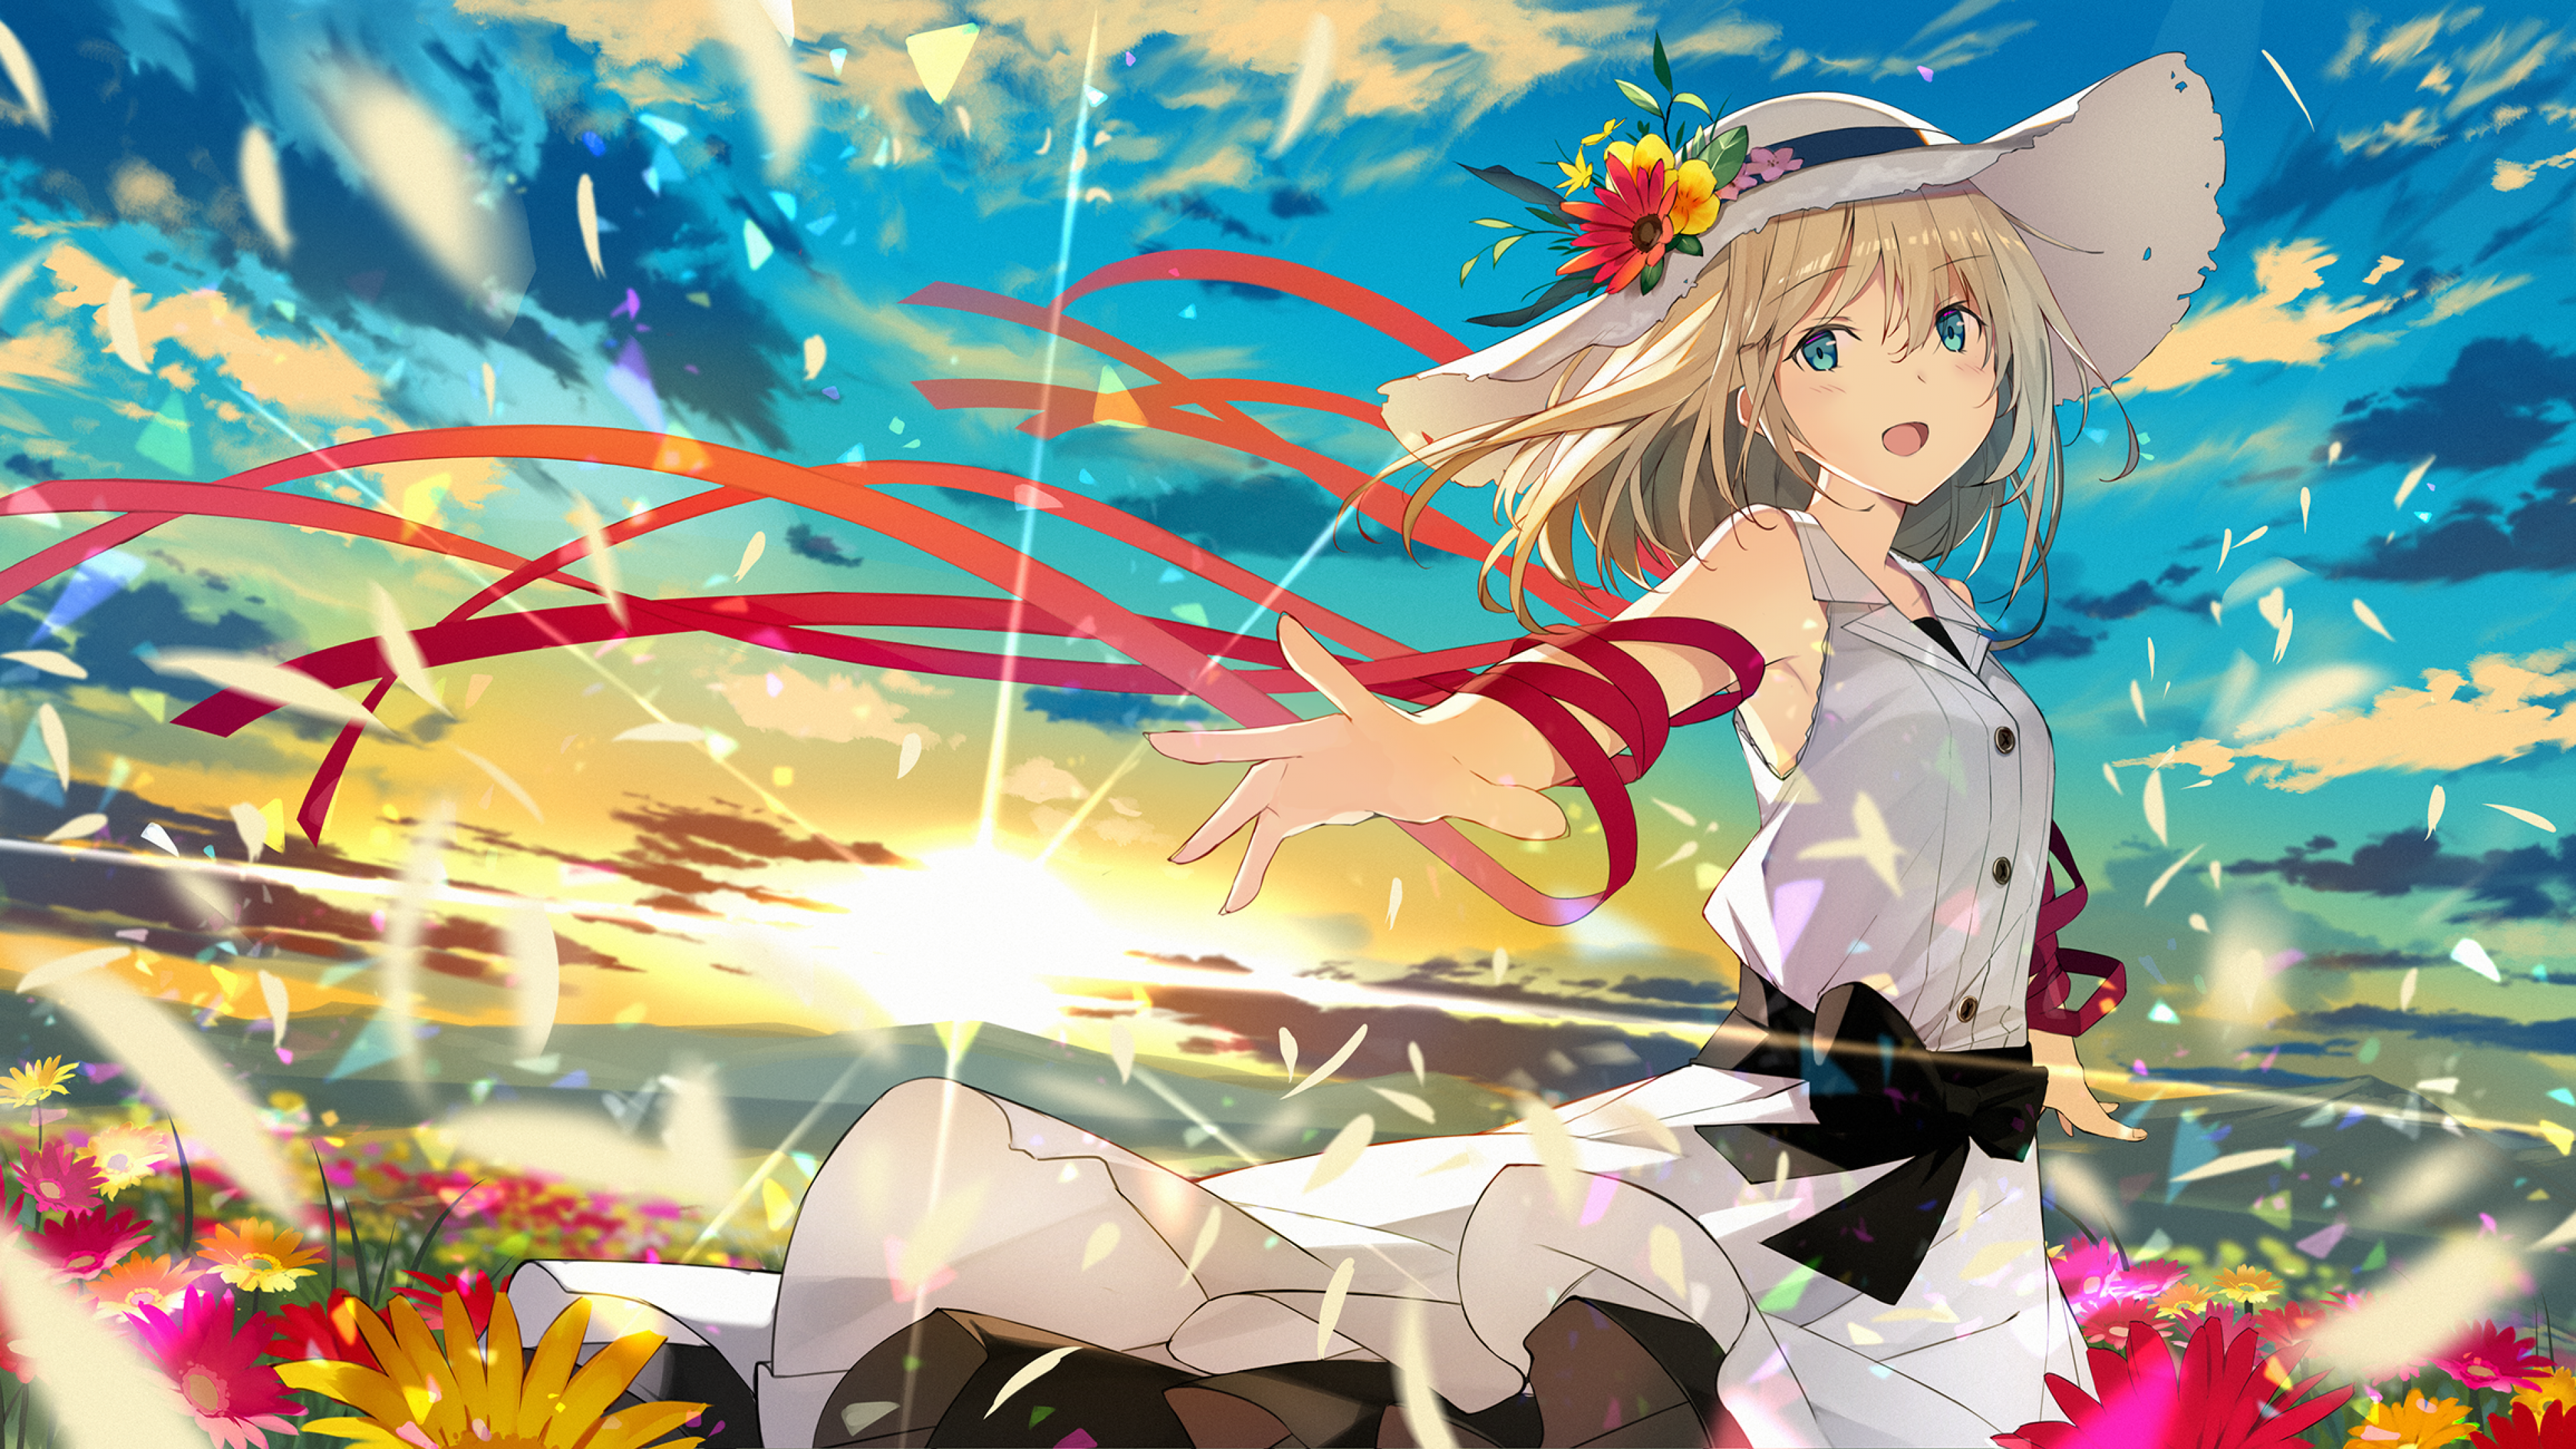 Download 3840x2160 Anime Girl, Colorful, Sunshine, Summer, Clouds, Scenic Wallpaper for UHD TV